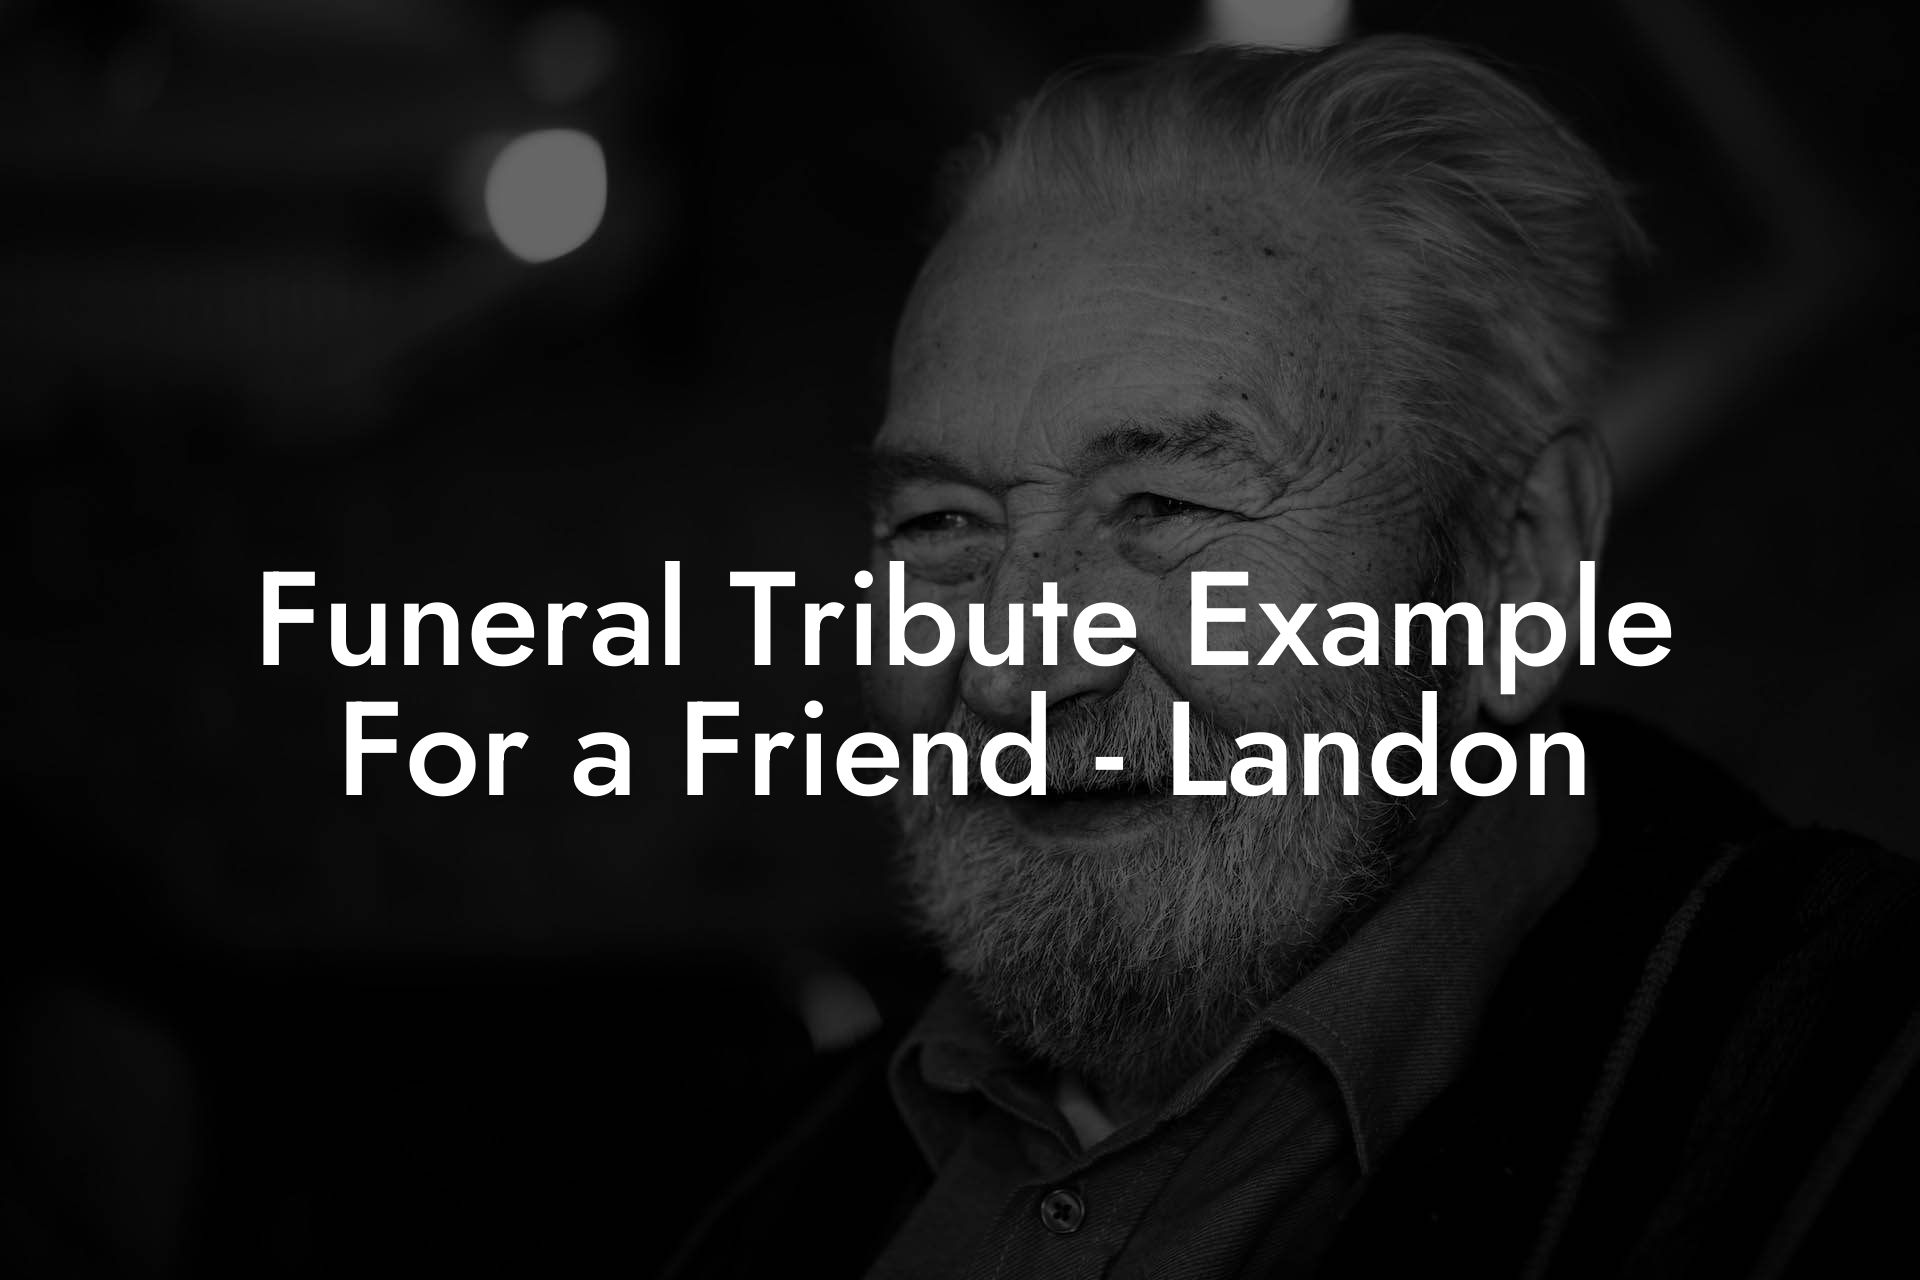 Funeral Tribute Example For a Friend - Landon